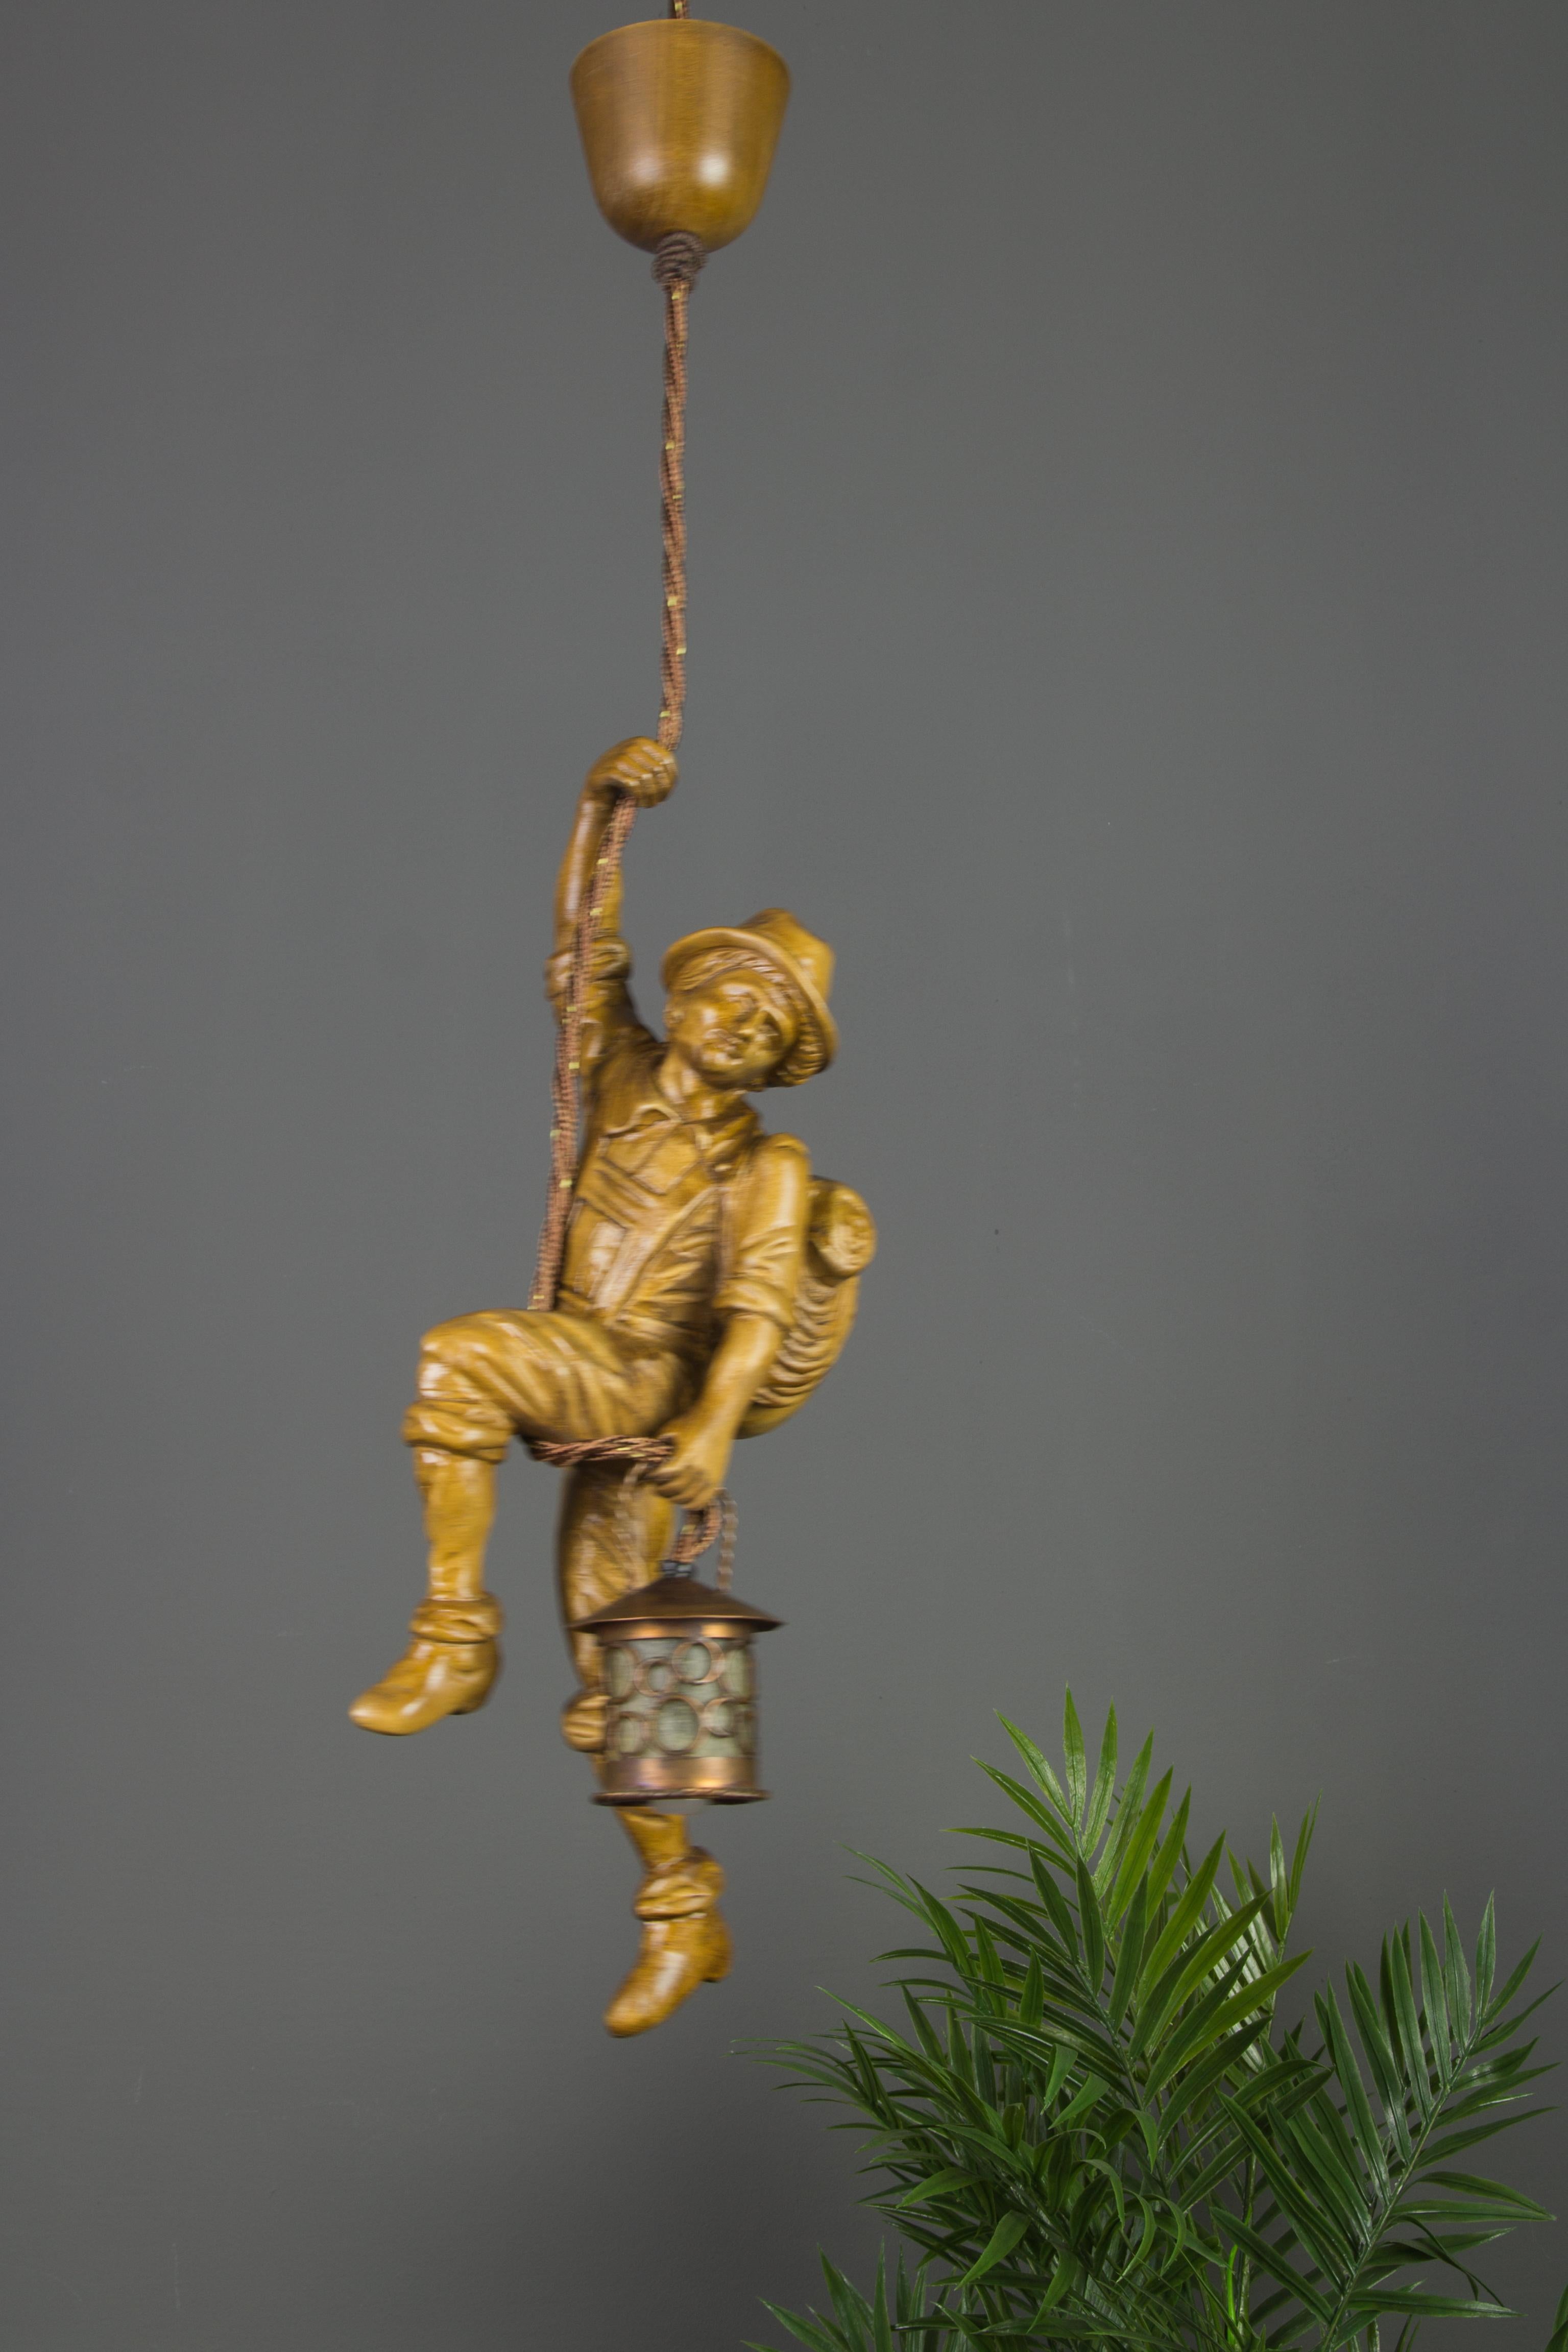 Hand-Carved German Pendant Light Hand Carved Wood Figure Mountaineer Climber with Lantern